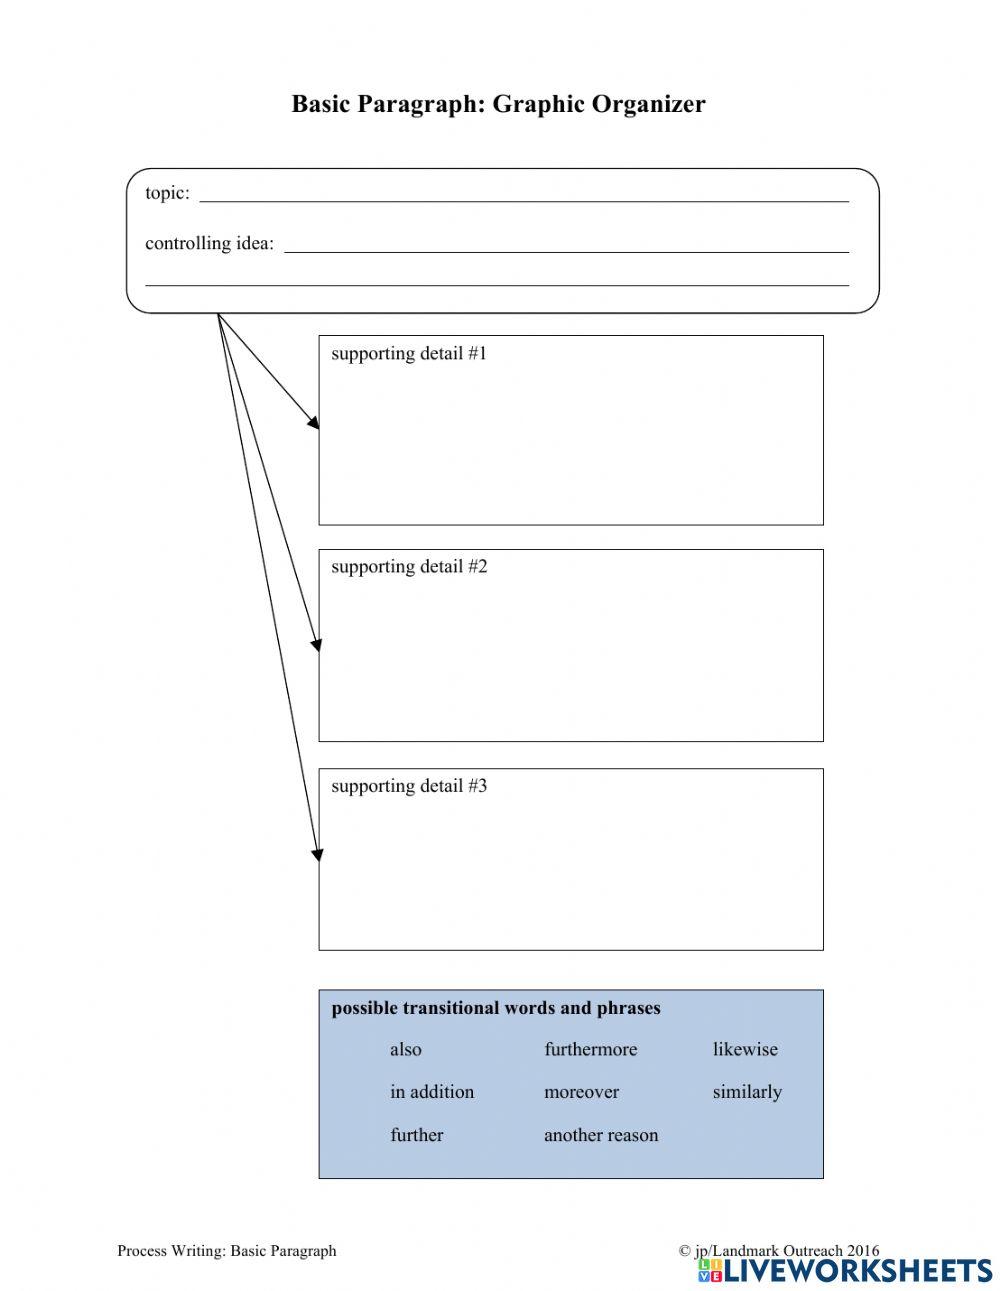 Paragraph Graphic Organizer online exercise for